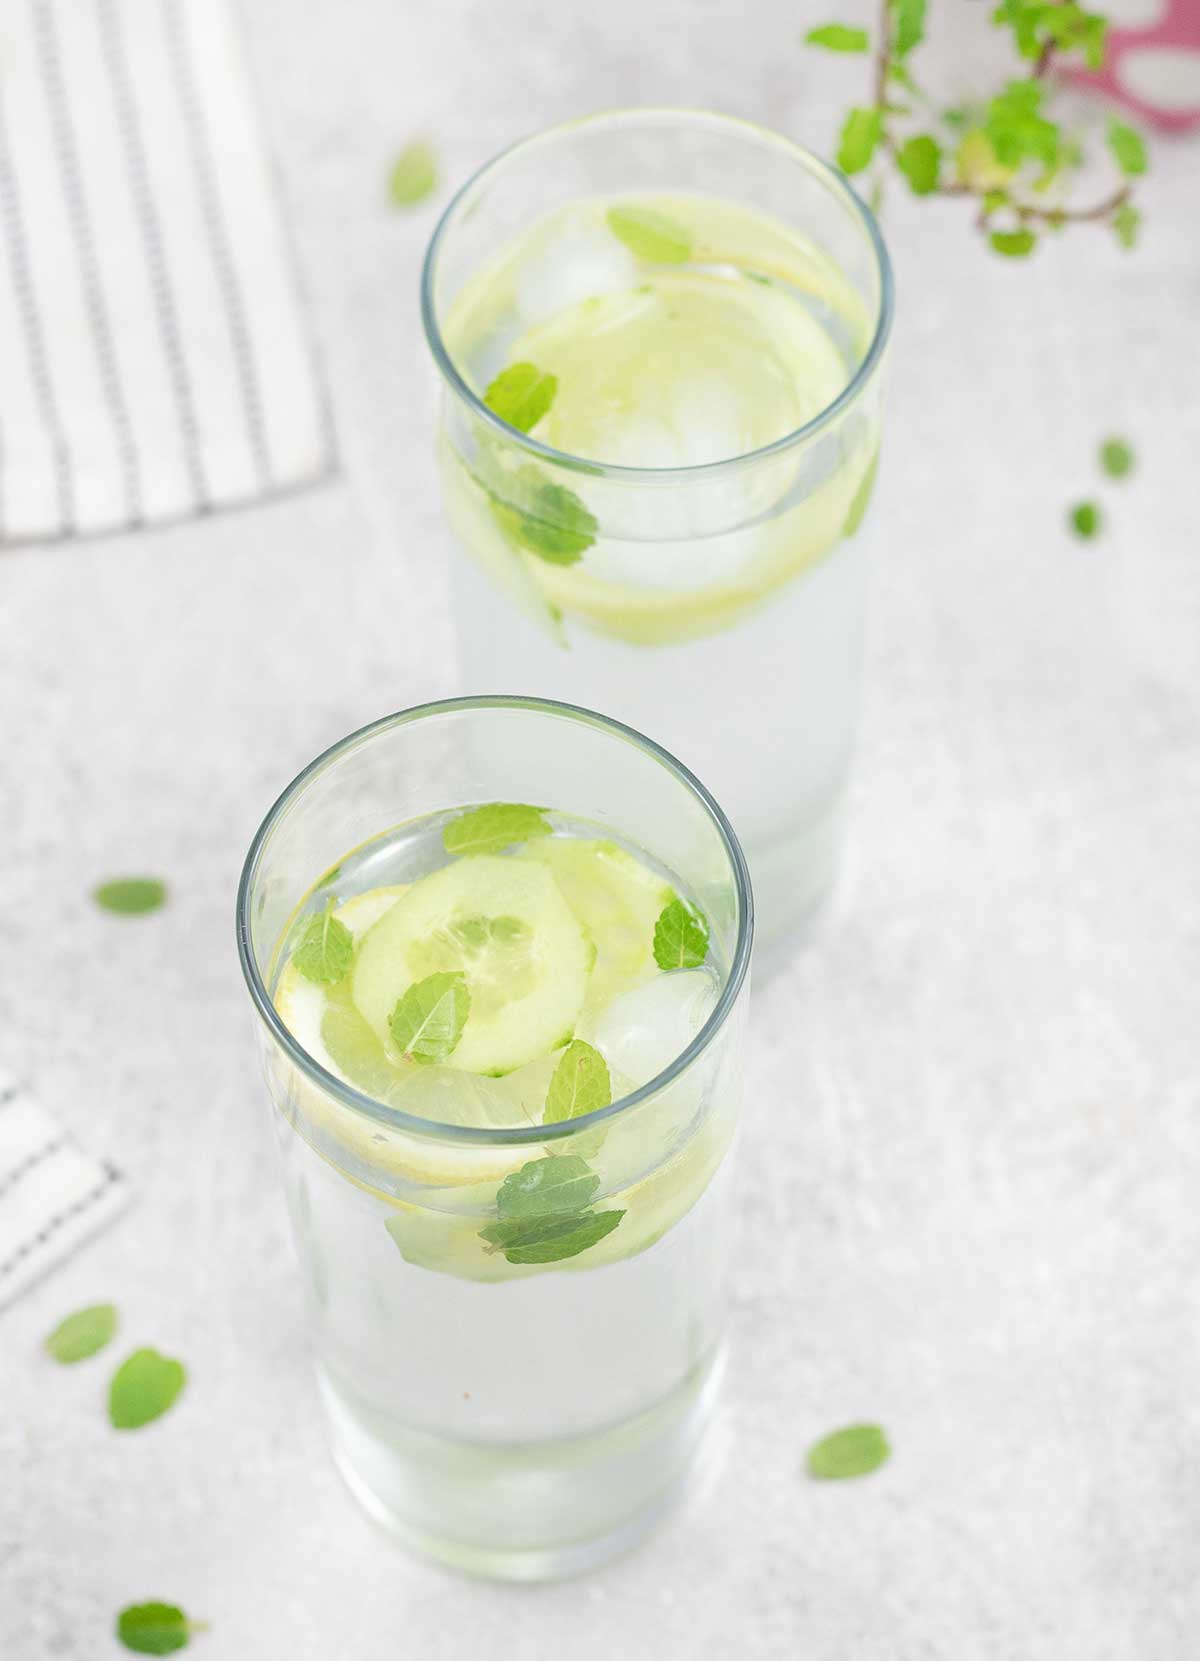 How to make cucumber water